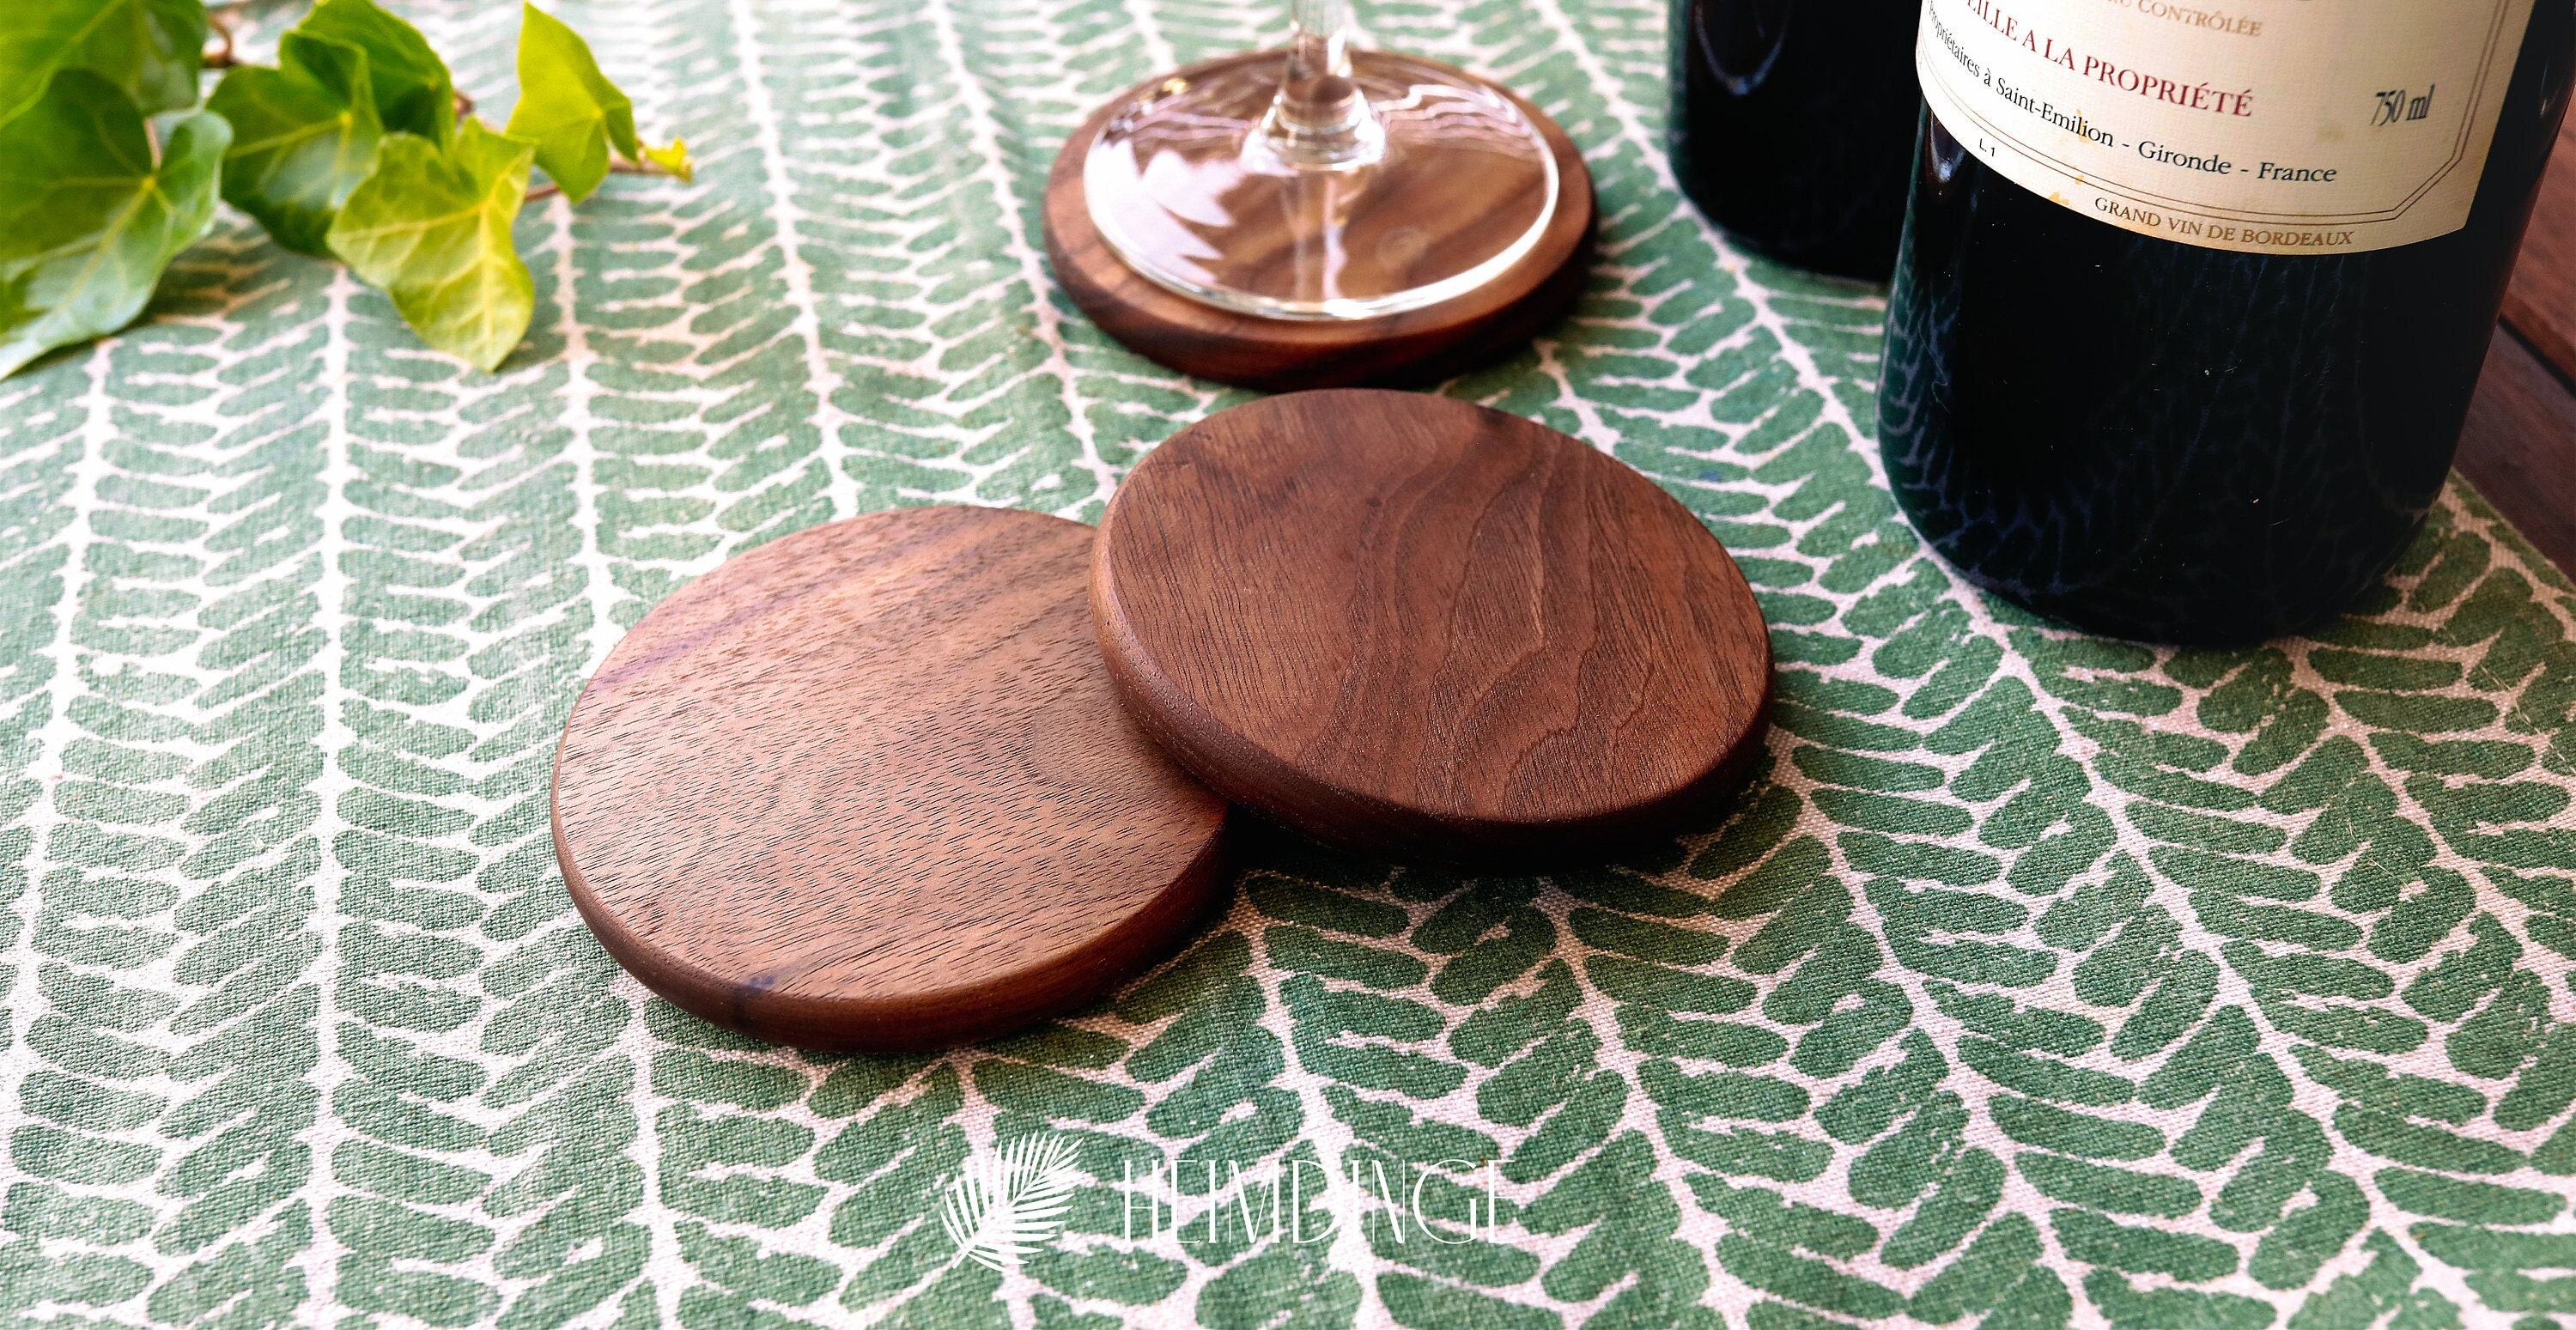 Set of 2 Fantasy Coasters, Pathfinder Drink Coasters, Wooden Coasters, Game  Coasters, Dragon Lovers Gift, Engraved Coasters 